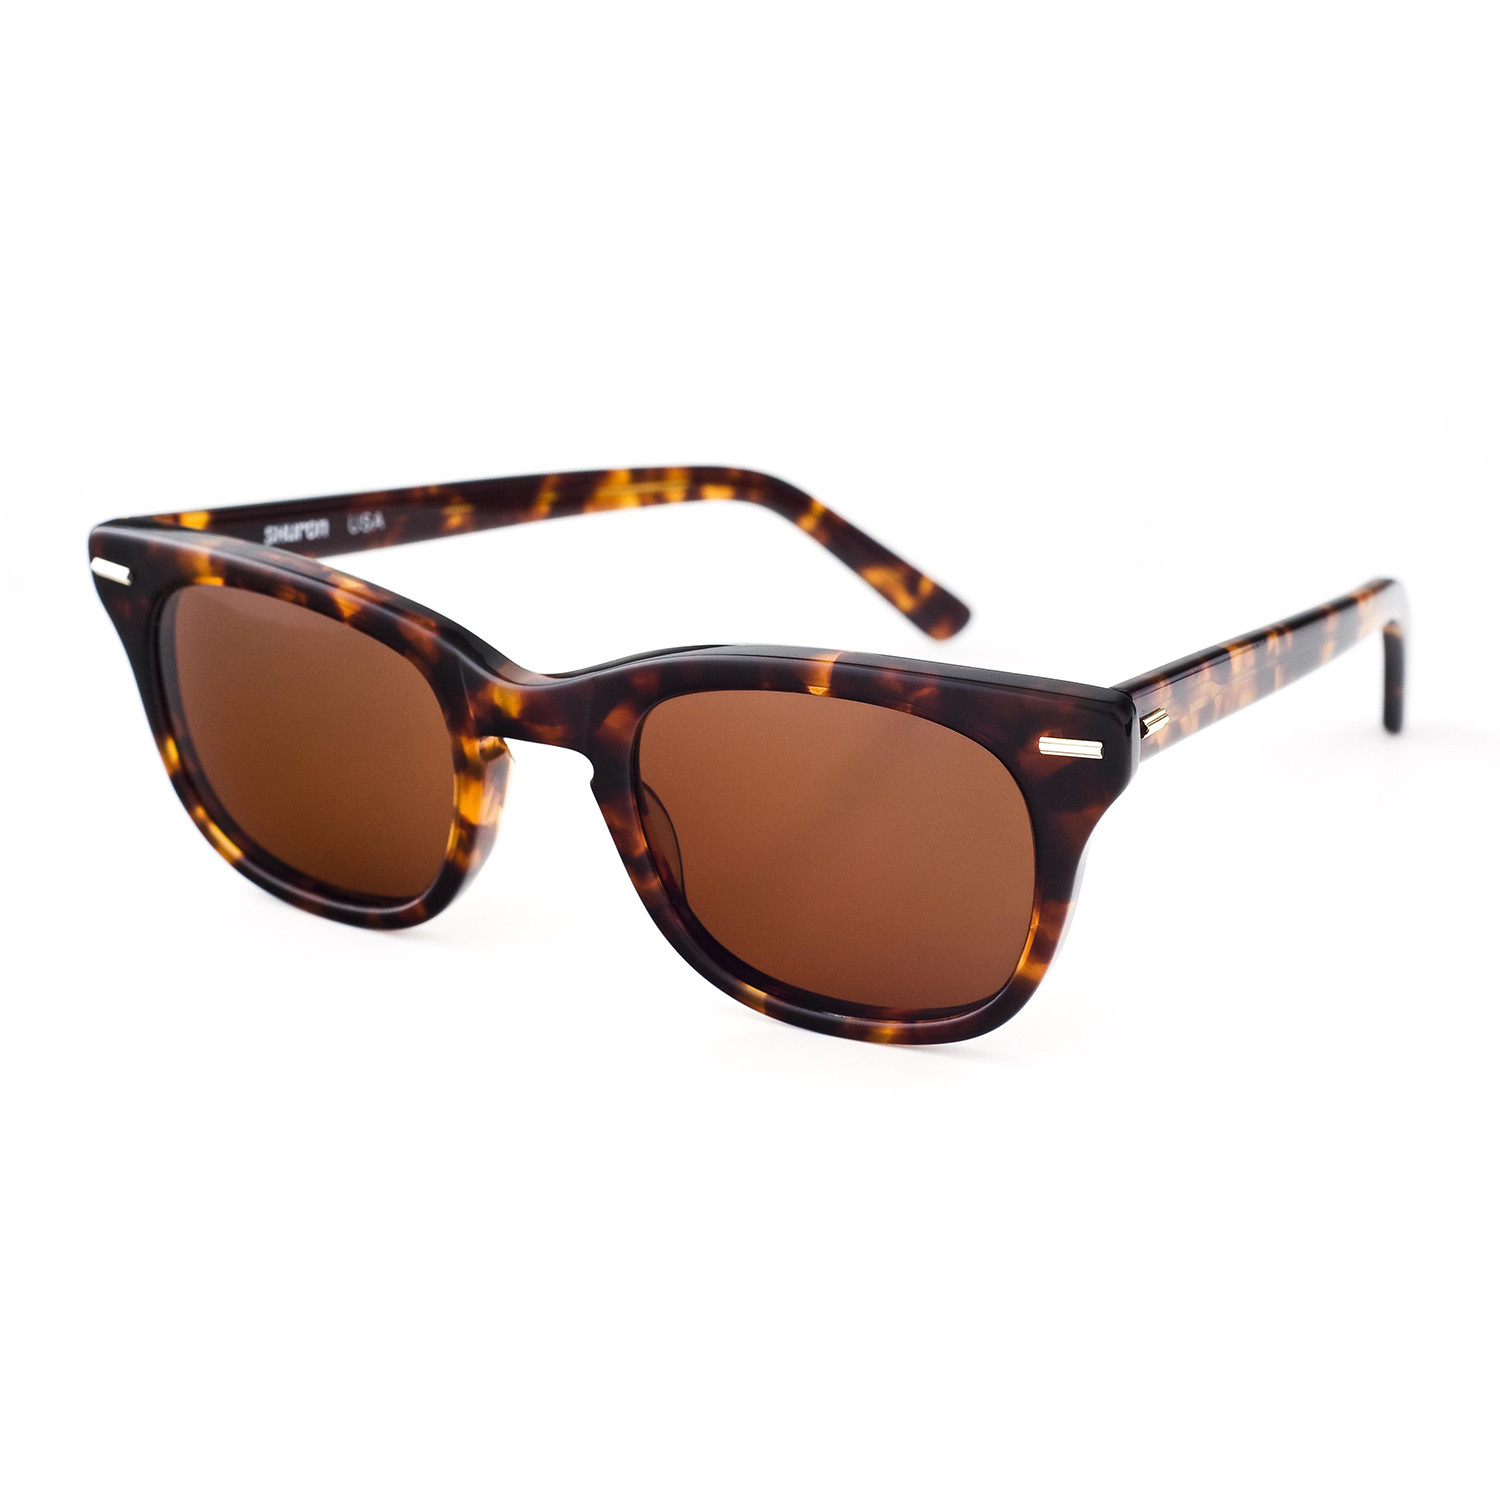 Freeway Polarized Sunglasses // Amber Frame + Brown Lens (Small ...